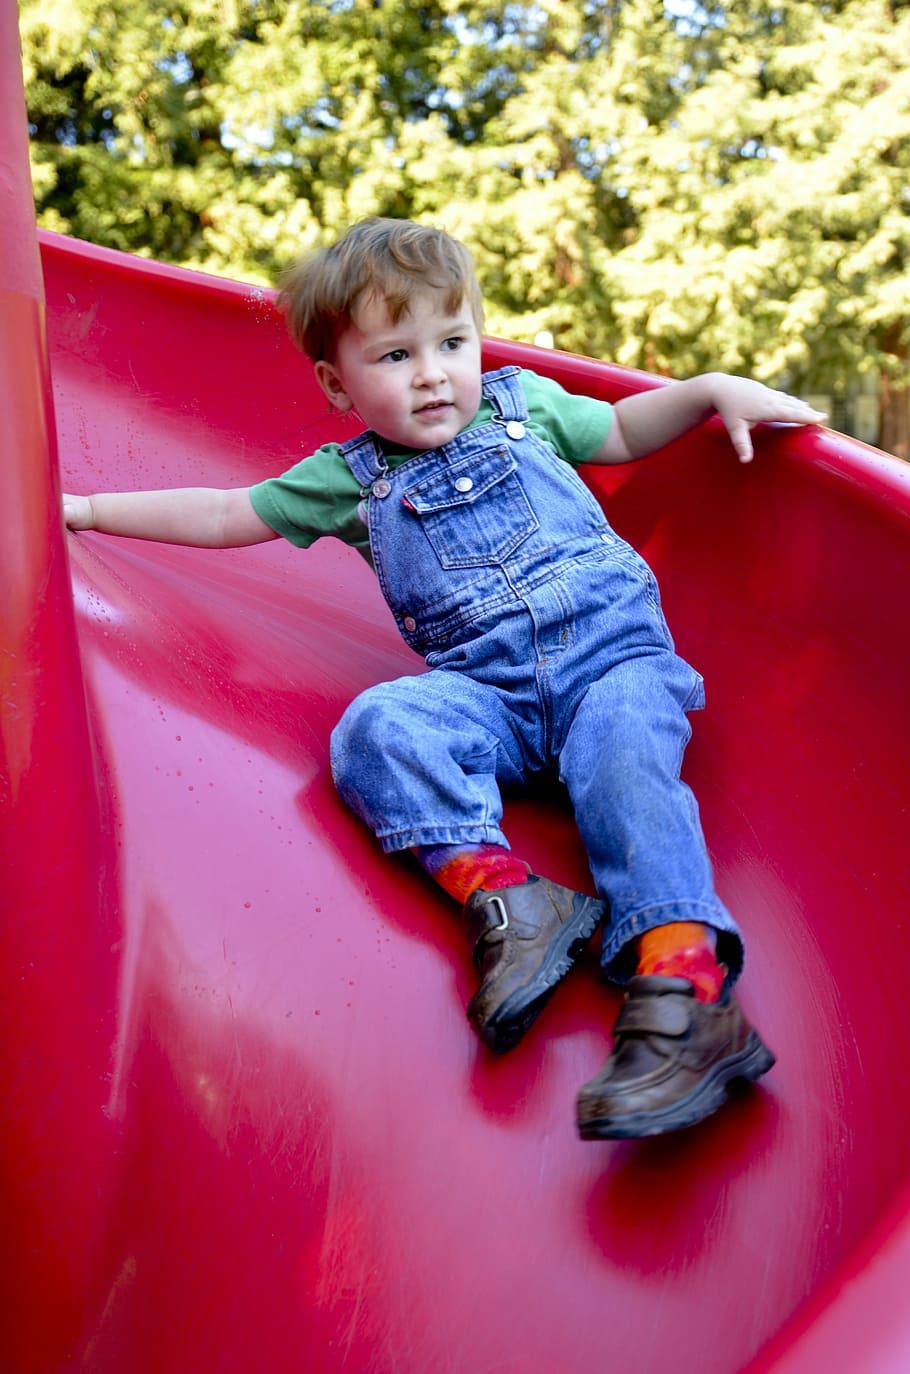 Slide, Play, park, full length, playground, one person, childhood